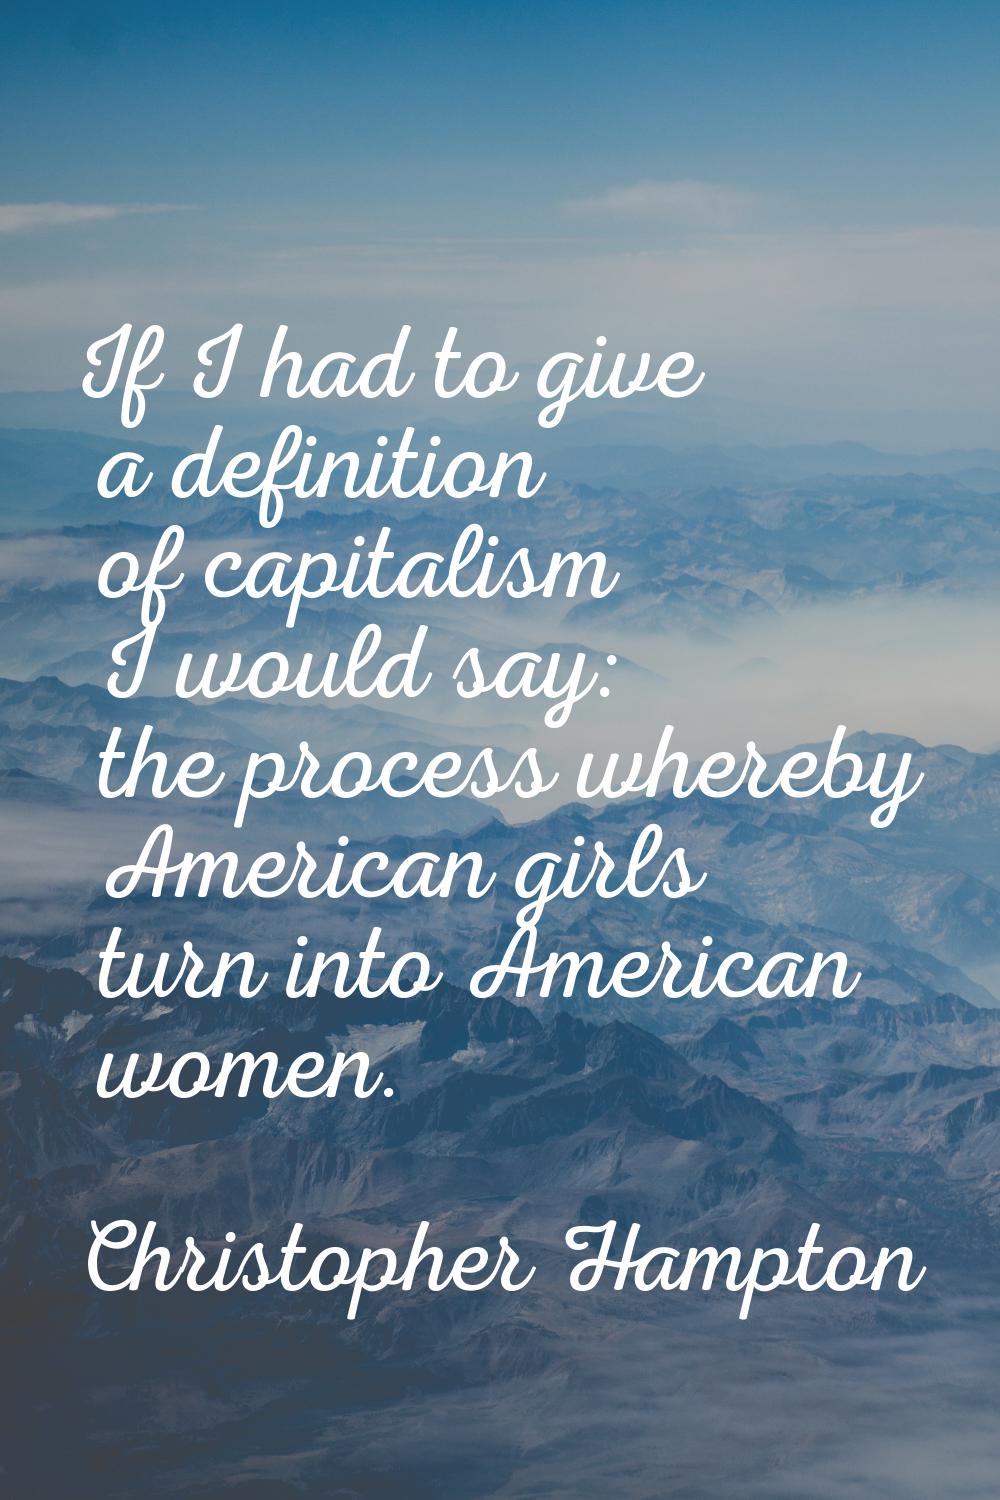 If I had to give a definition of capitalism I would say: the process whereby American girls turn in